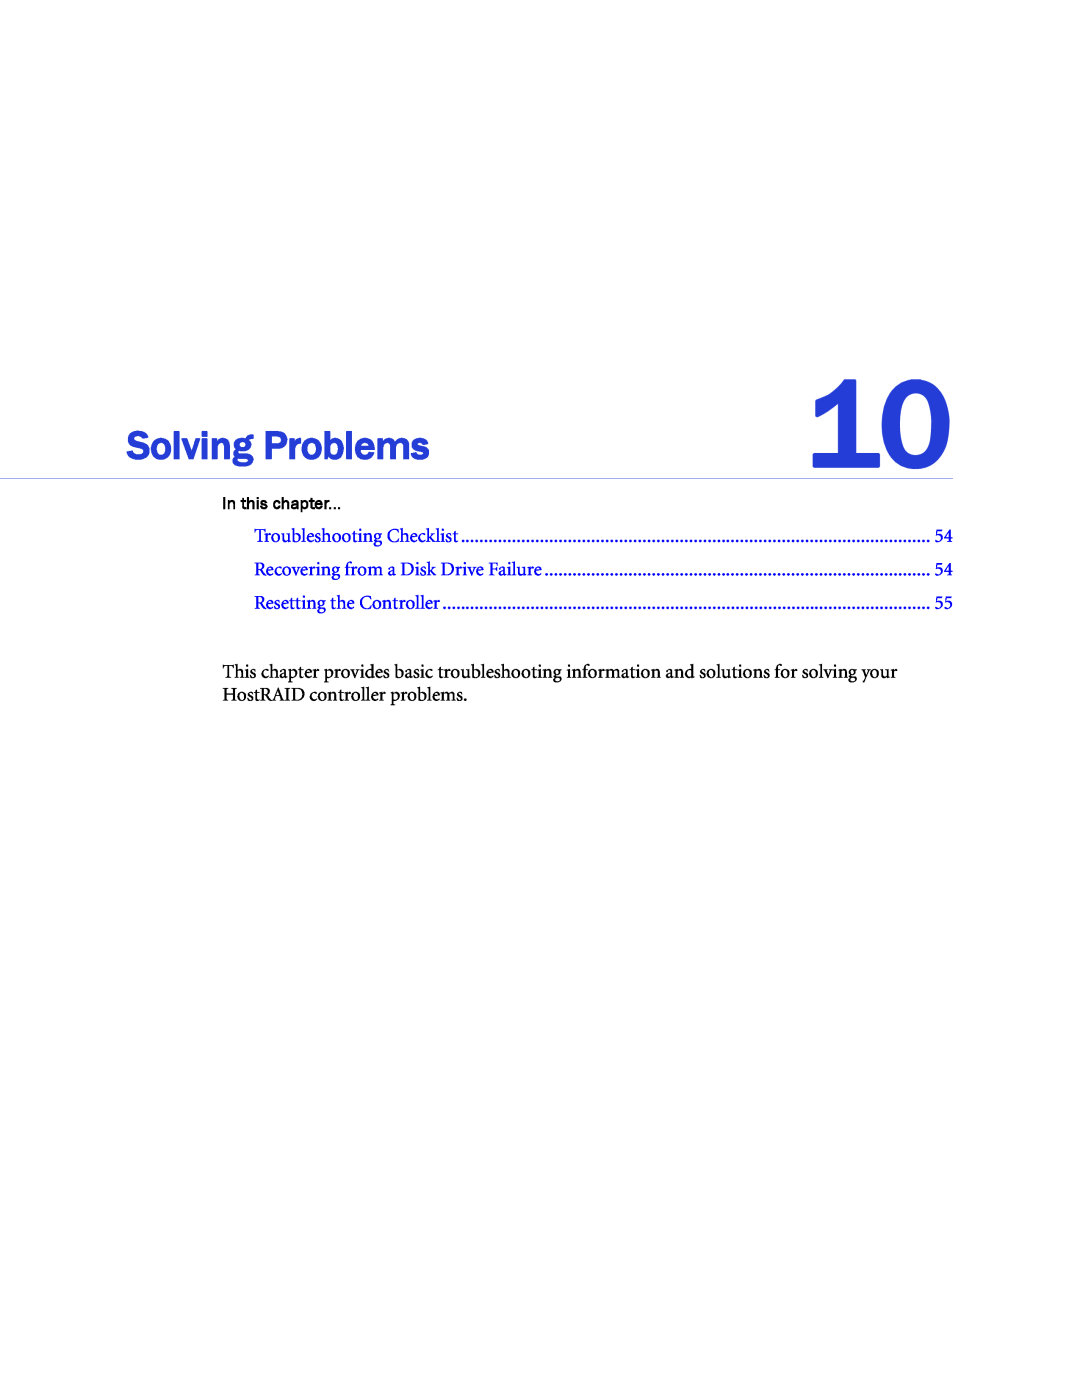 Adaptec 1220SA, 58300 Solving Problems, In this chapter, Troubleshooting Checklist, Recovering from a Disk Drive Failure 